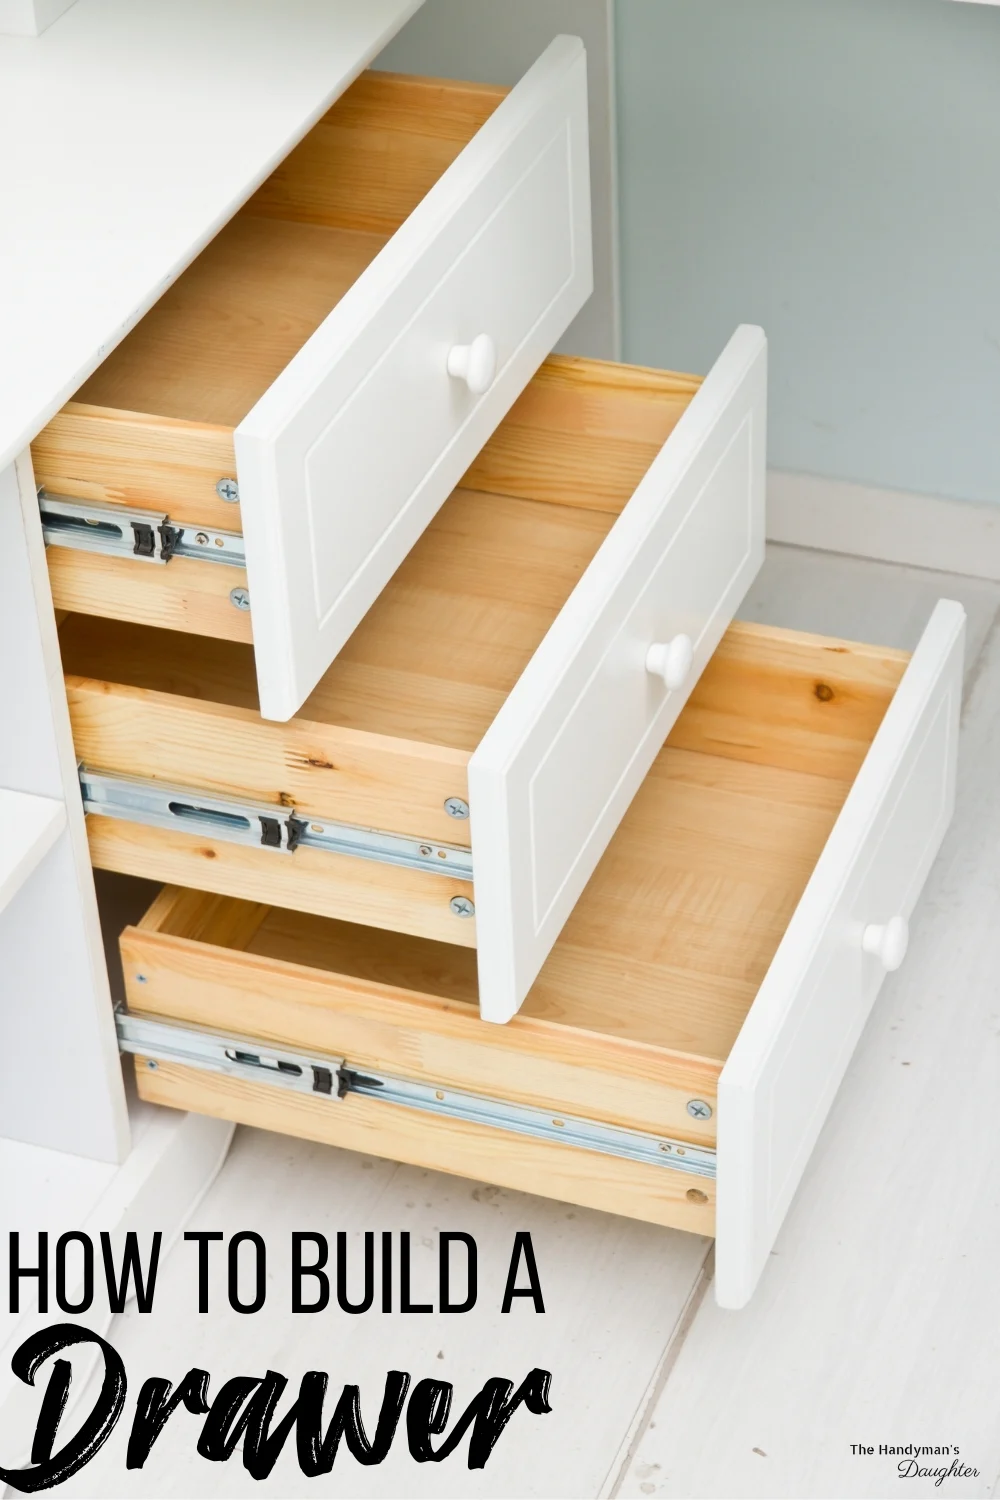 https://www.thehandymansdaughter.com/wp-content/uploads/2021/09/How-to-Build-a-Drawer-Pin-1.jpg.webp